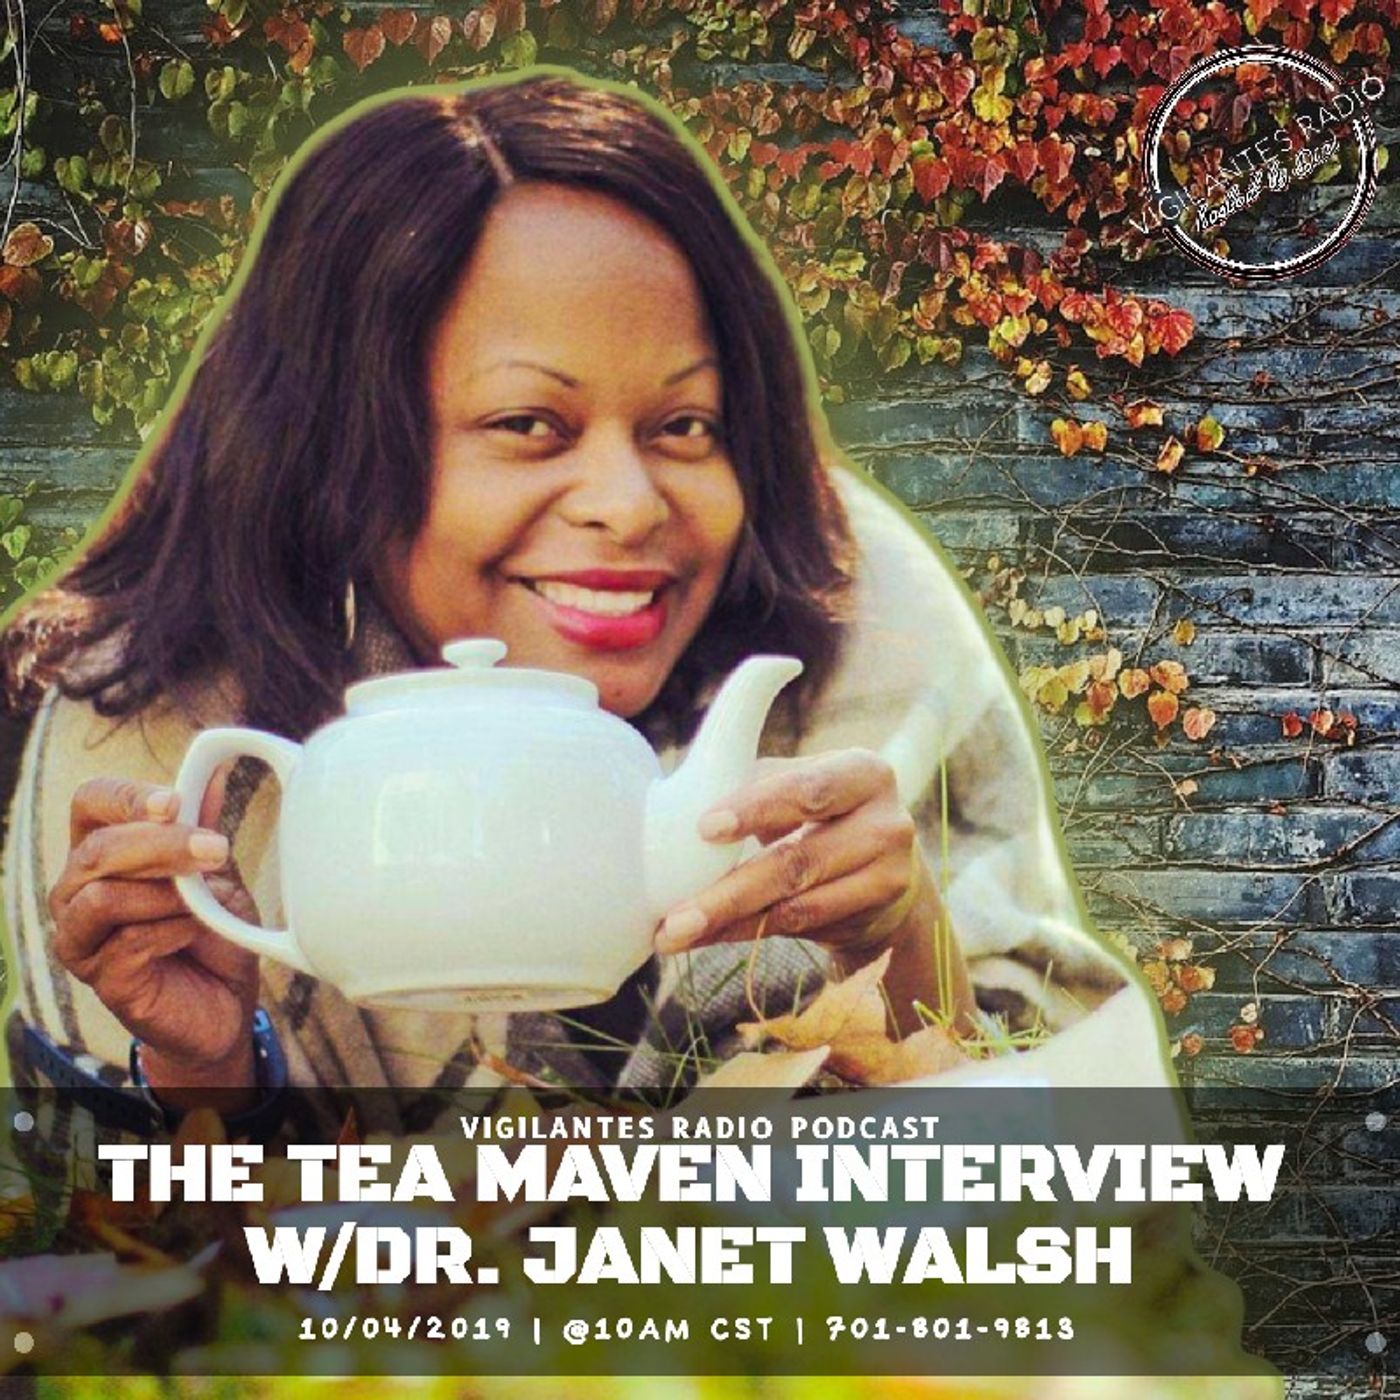 The Tea Maven w/Dr. Janet Walsh Interview. Image